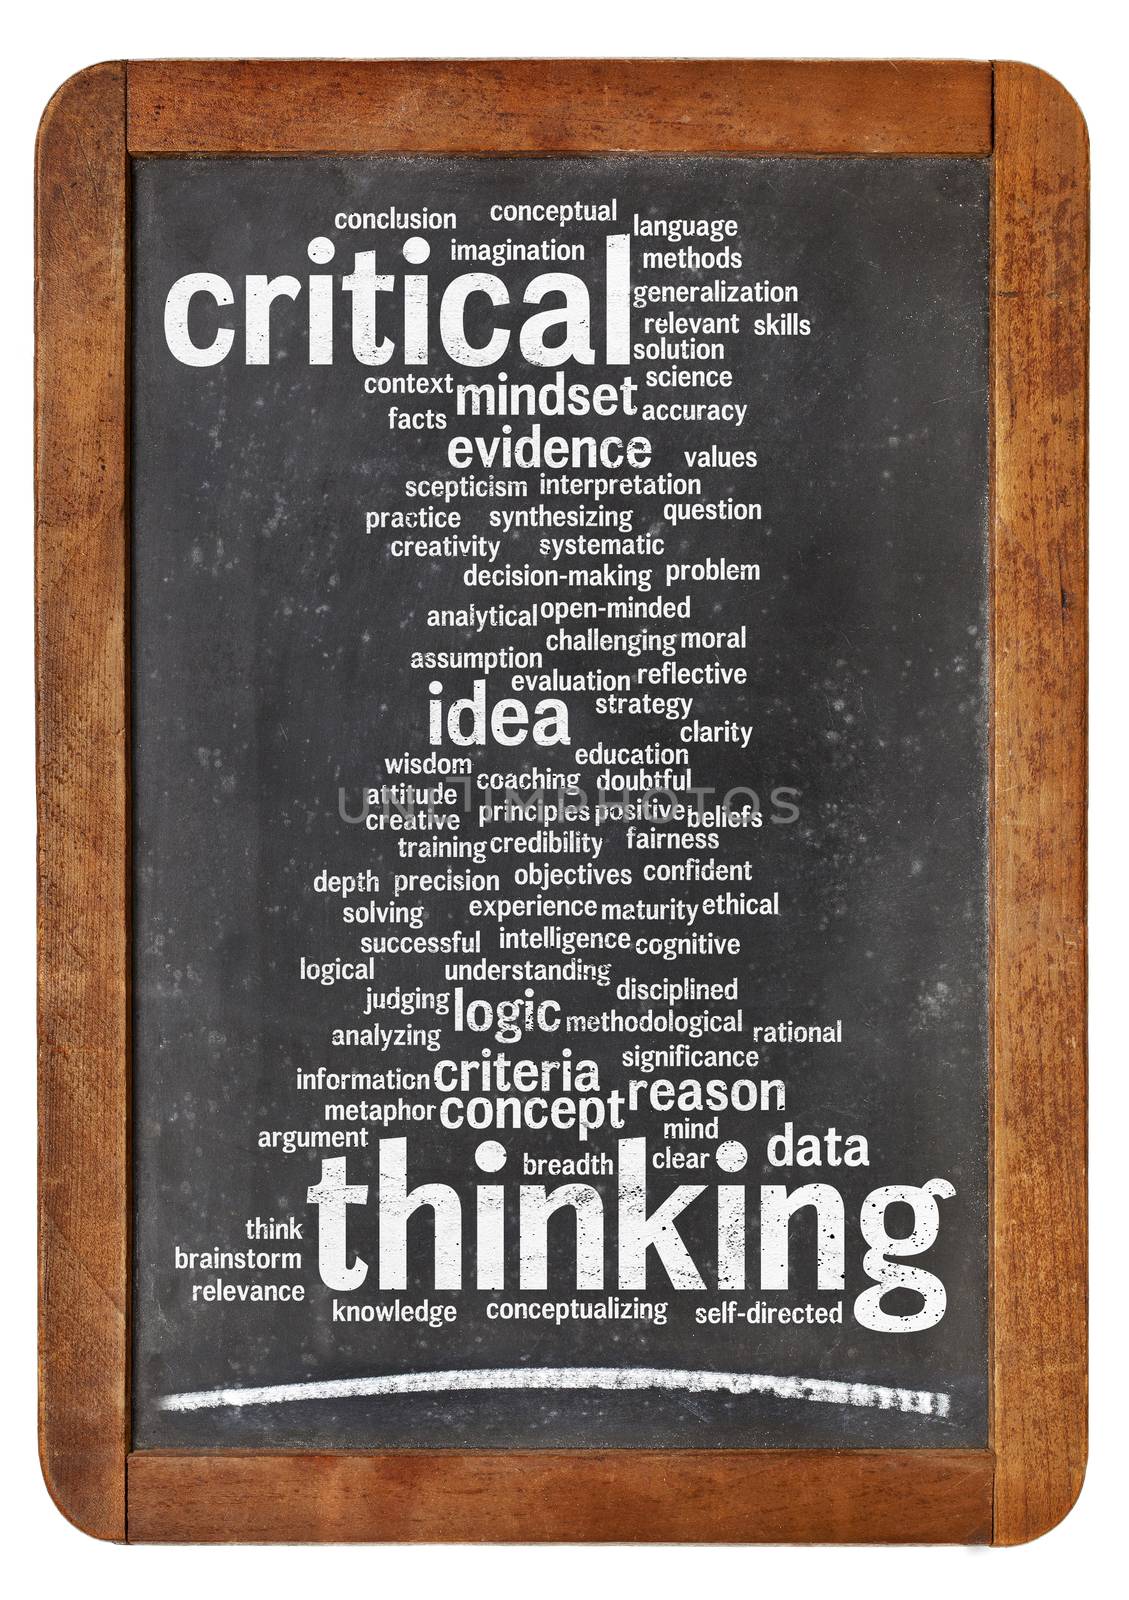 critical thinking word cloud by PixelsAway